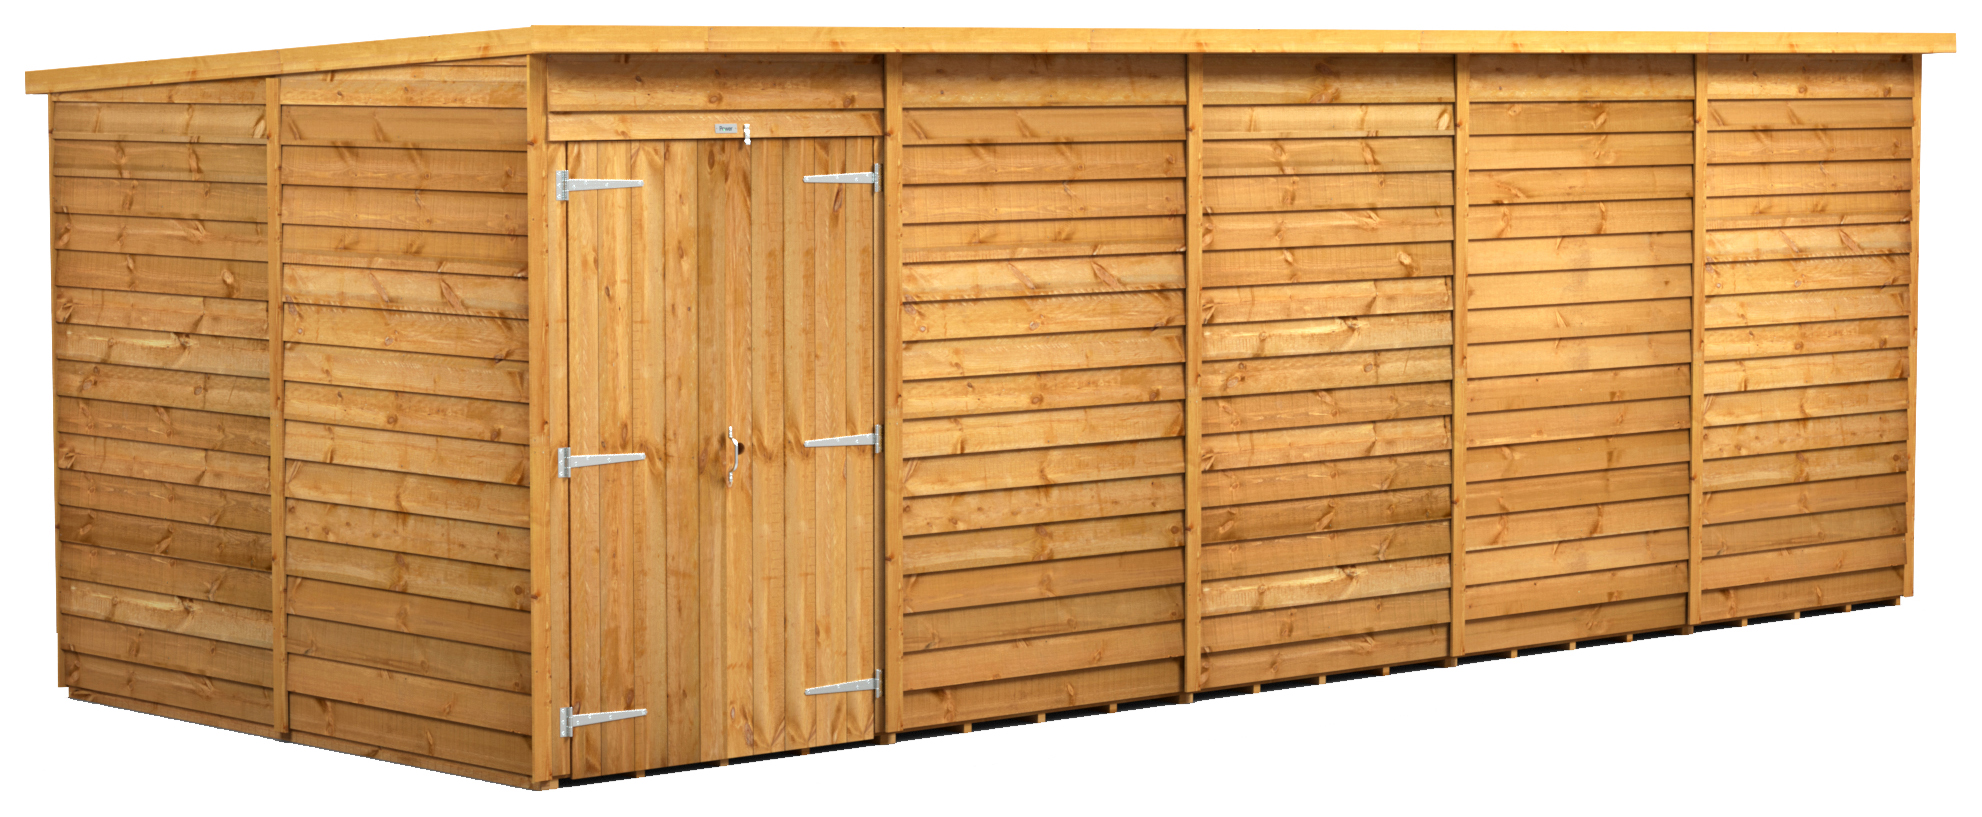 Power Sheds Double Door Pent Overlap Dip Treated Windowless Shed - 20 x 8ft